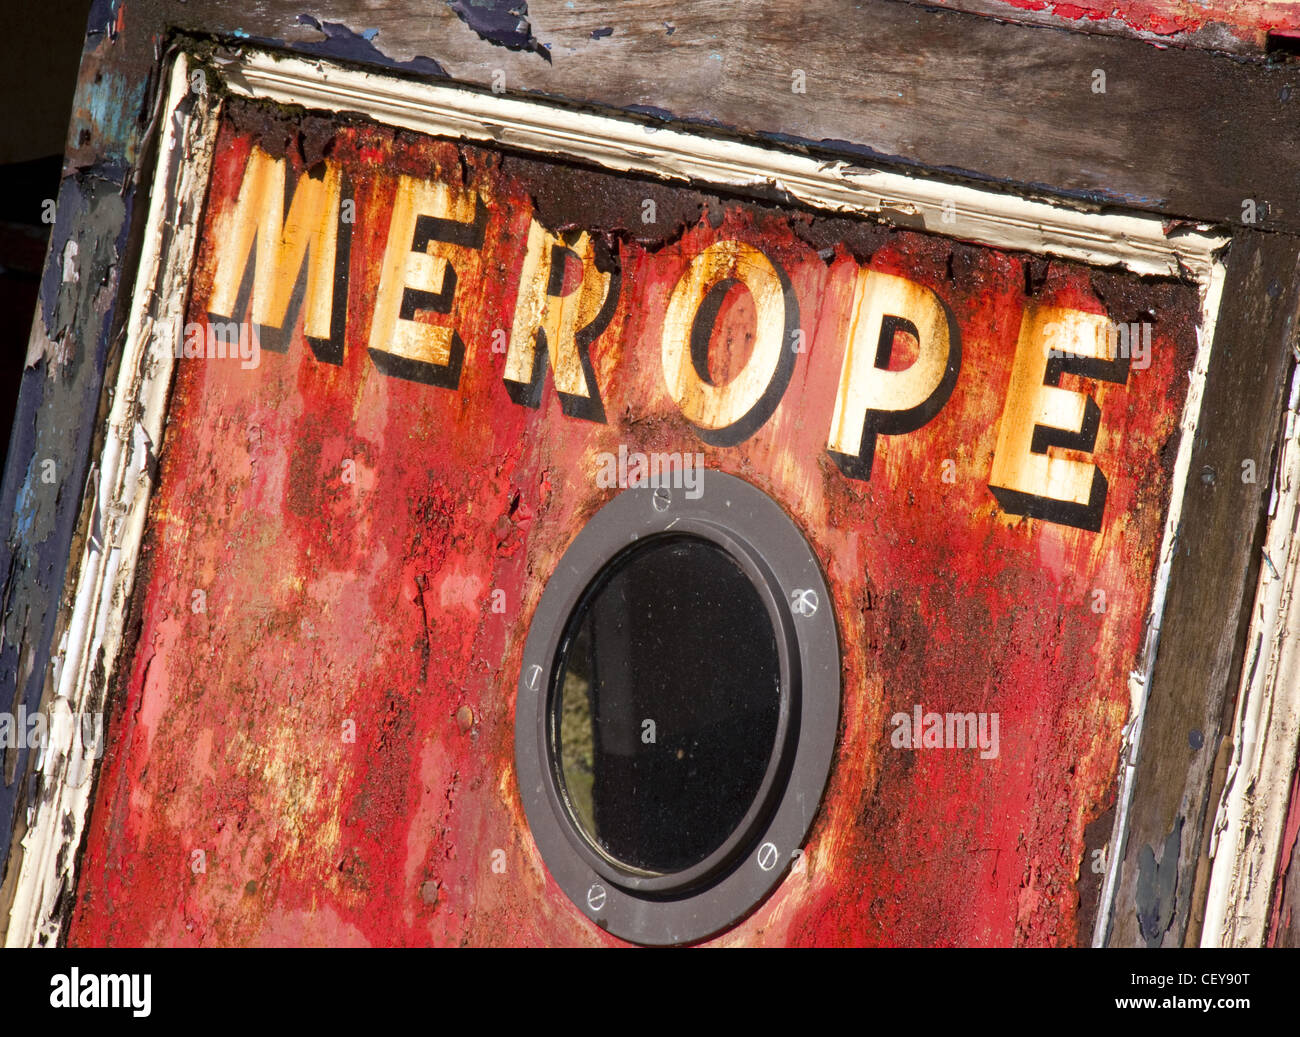 Merope, a decaying British canal boat in red Stock Photo